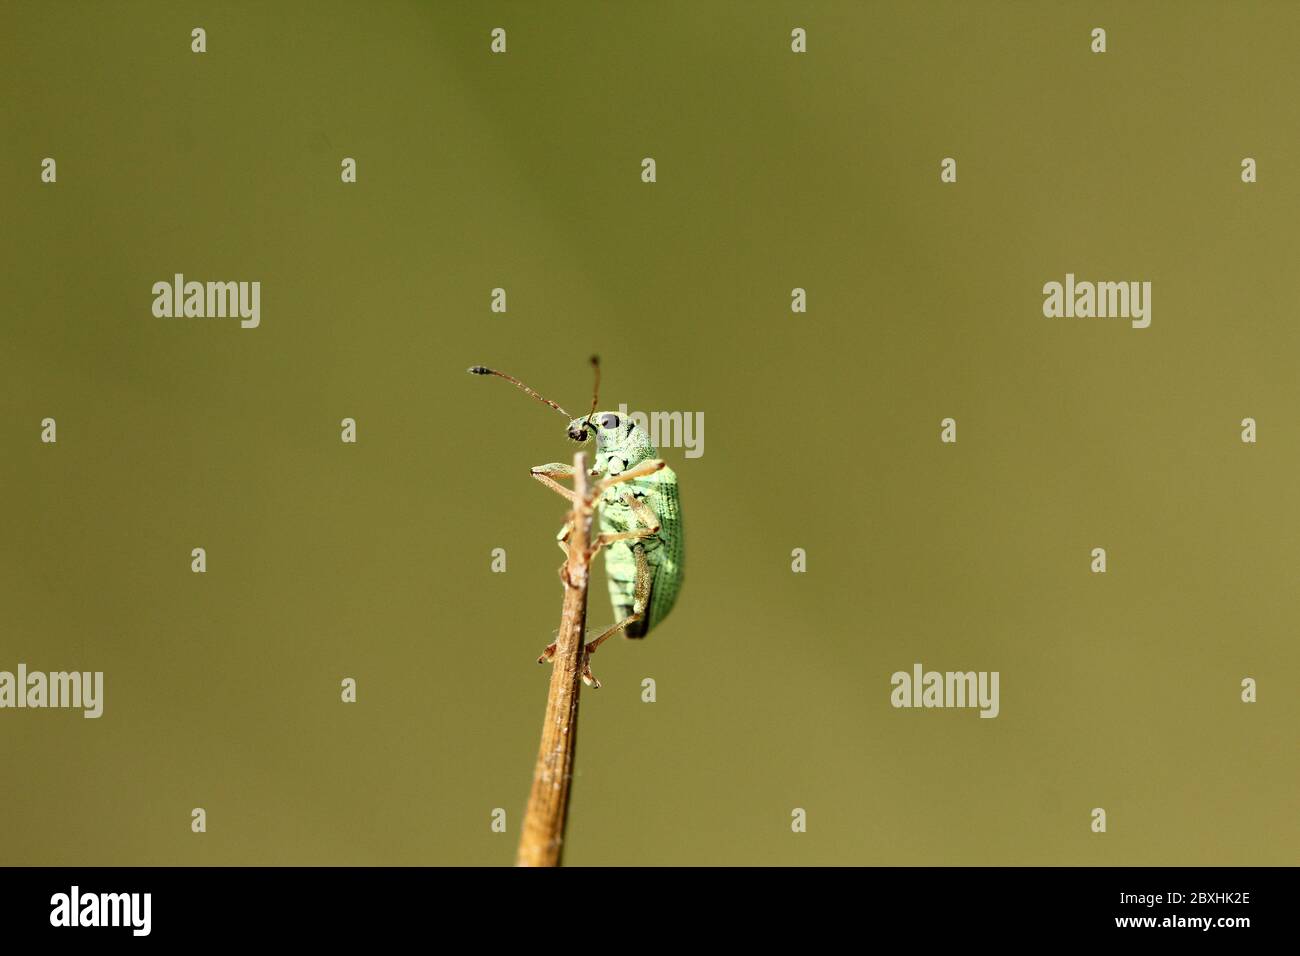 Broad-nosed weevil (Polydrusus pterygomalis) climbing up plant stem Stock Photo